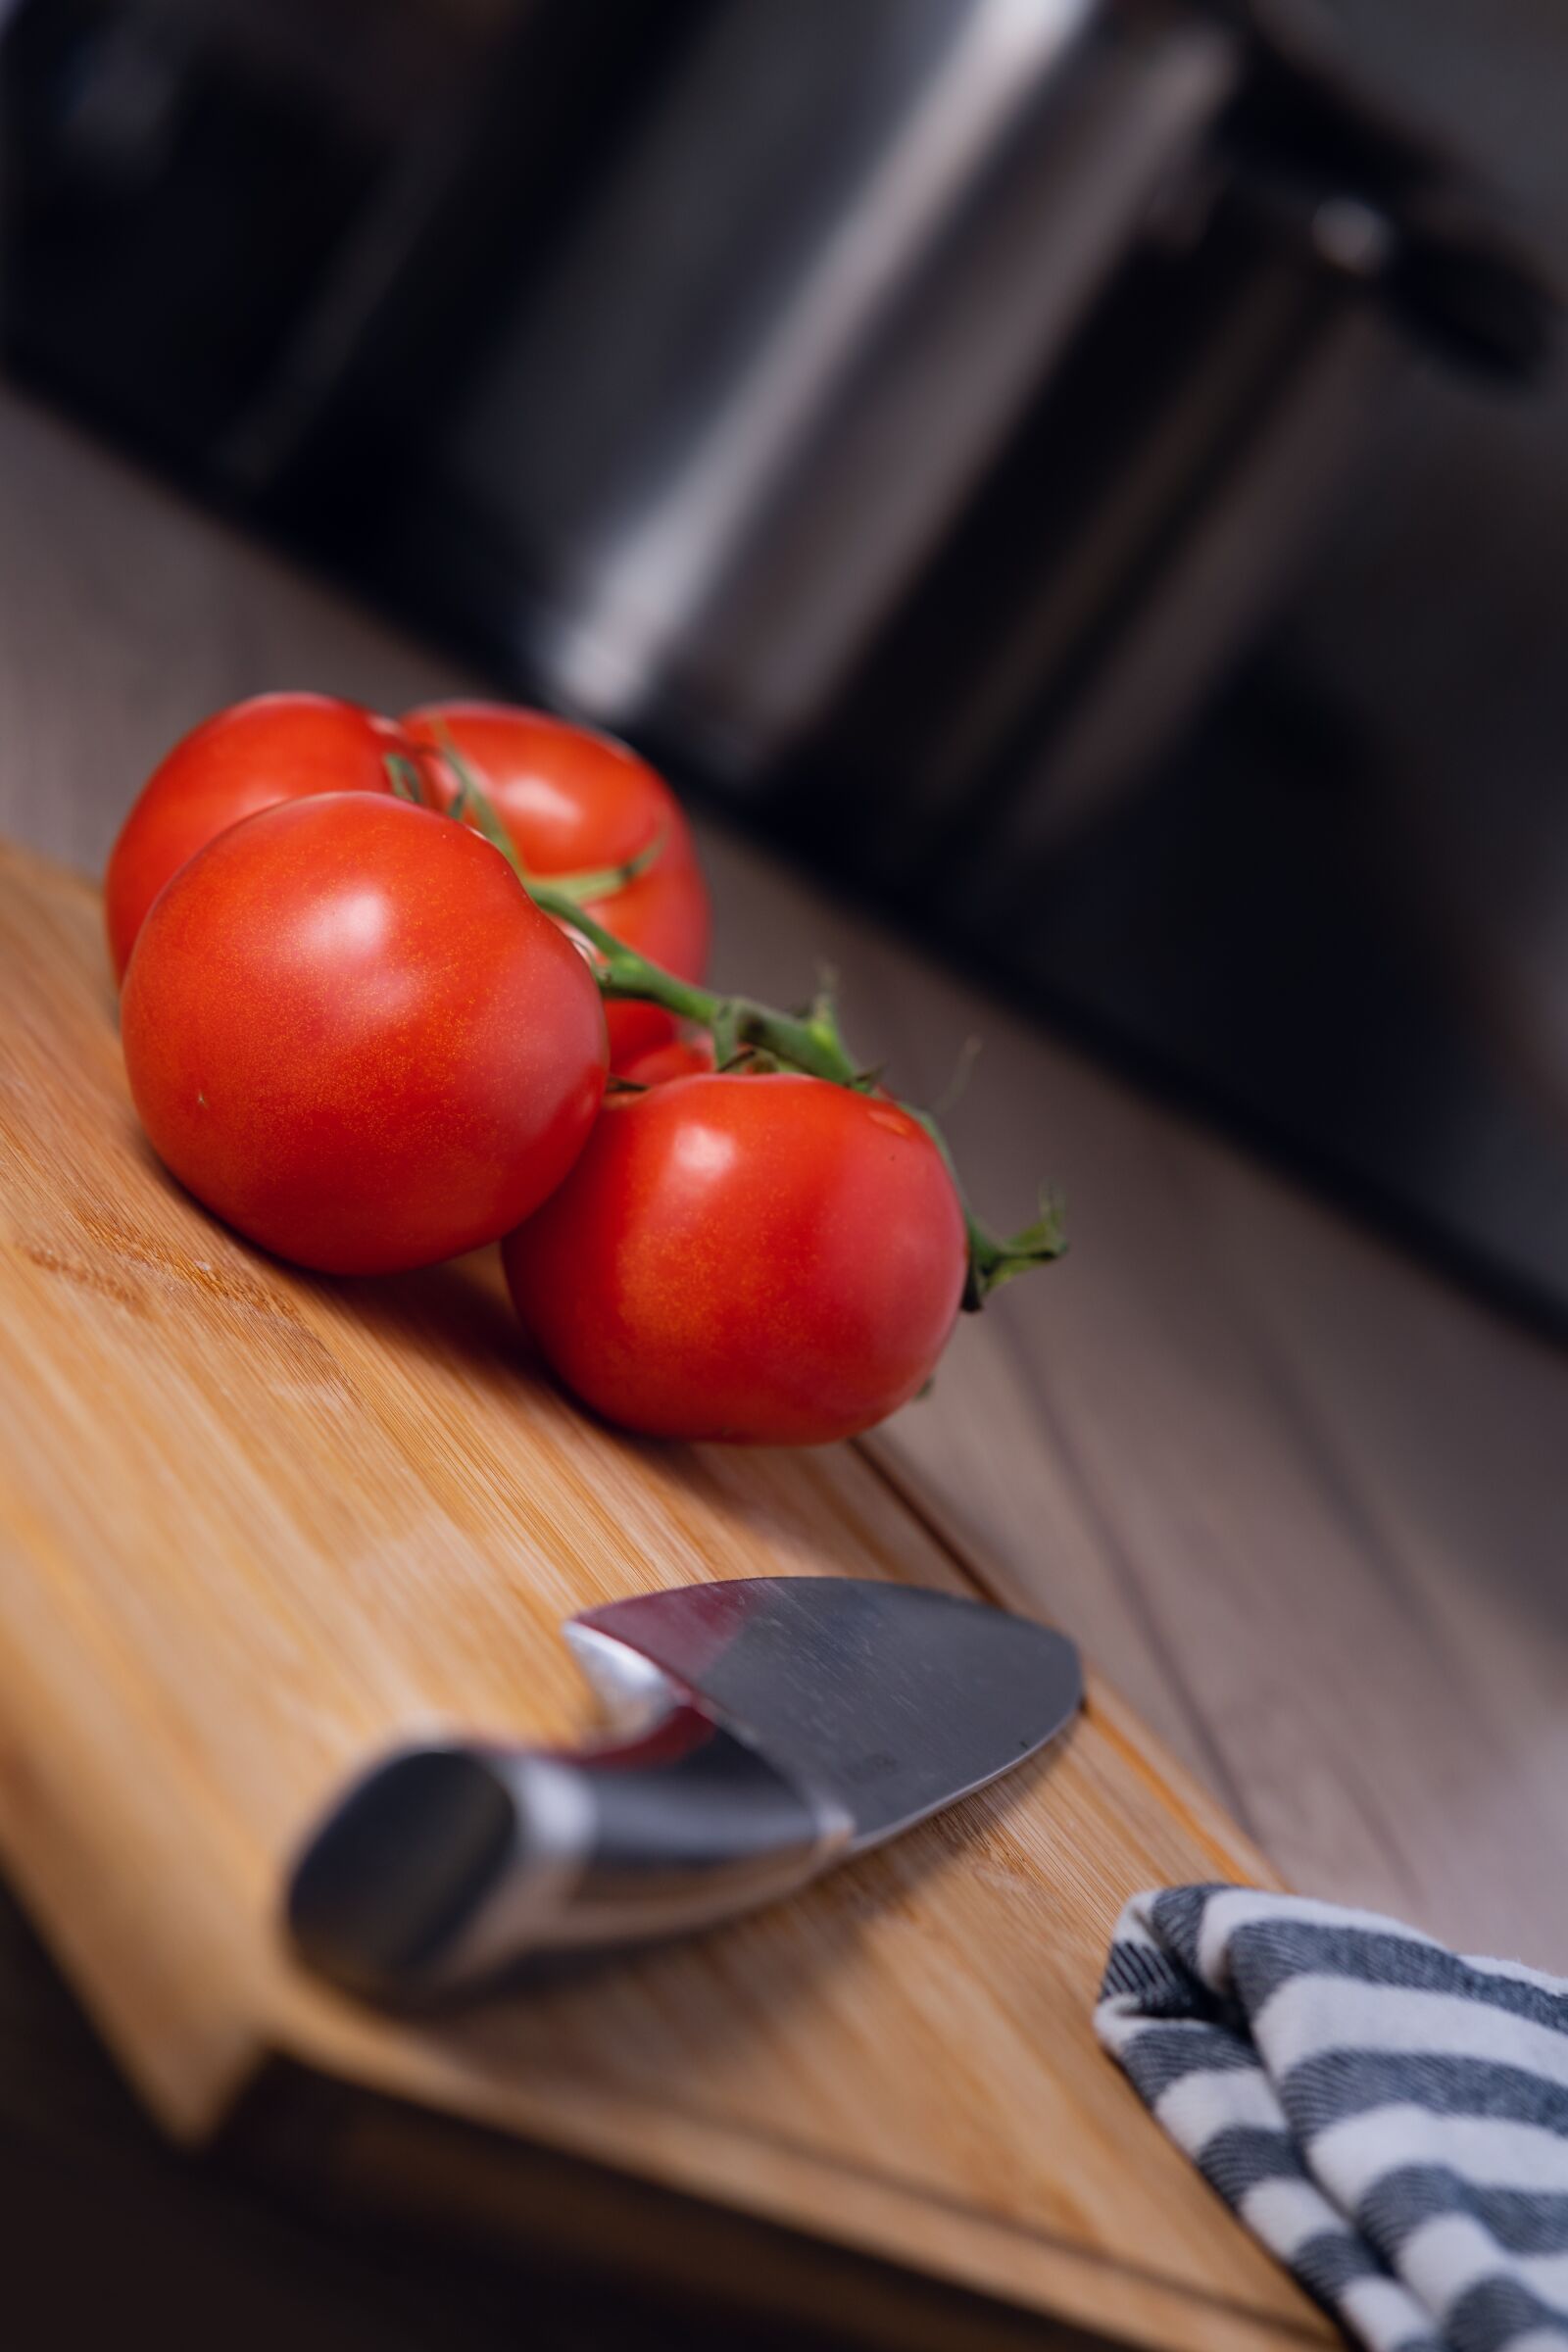 Sony a7 sample photo. Tomato, vegetable, healthy photography